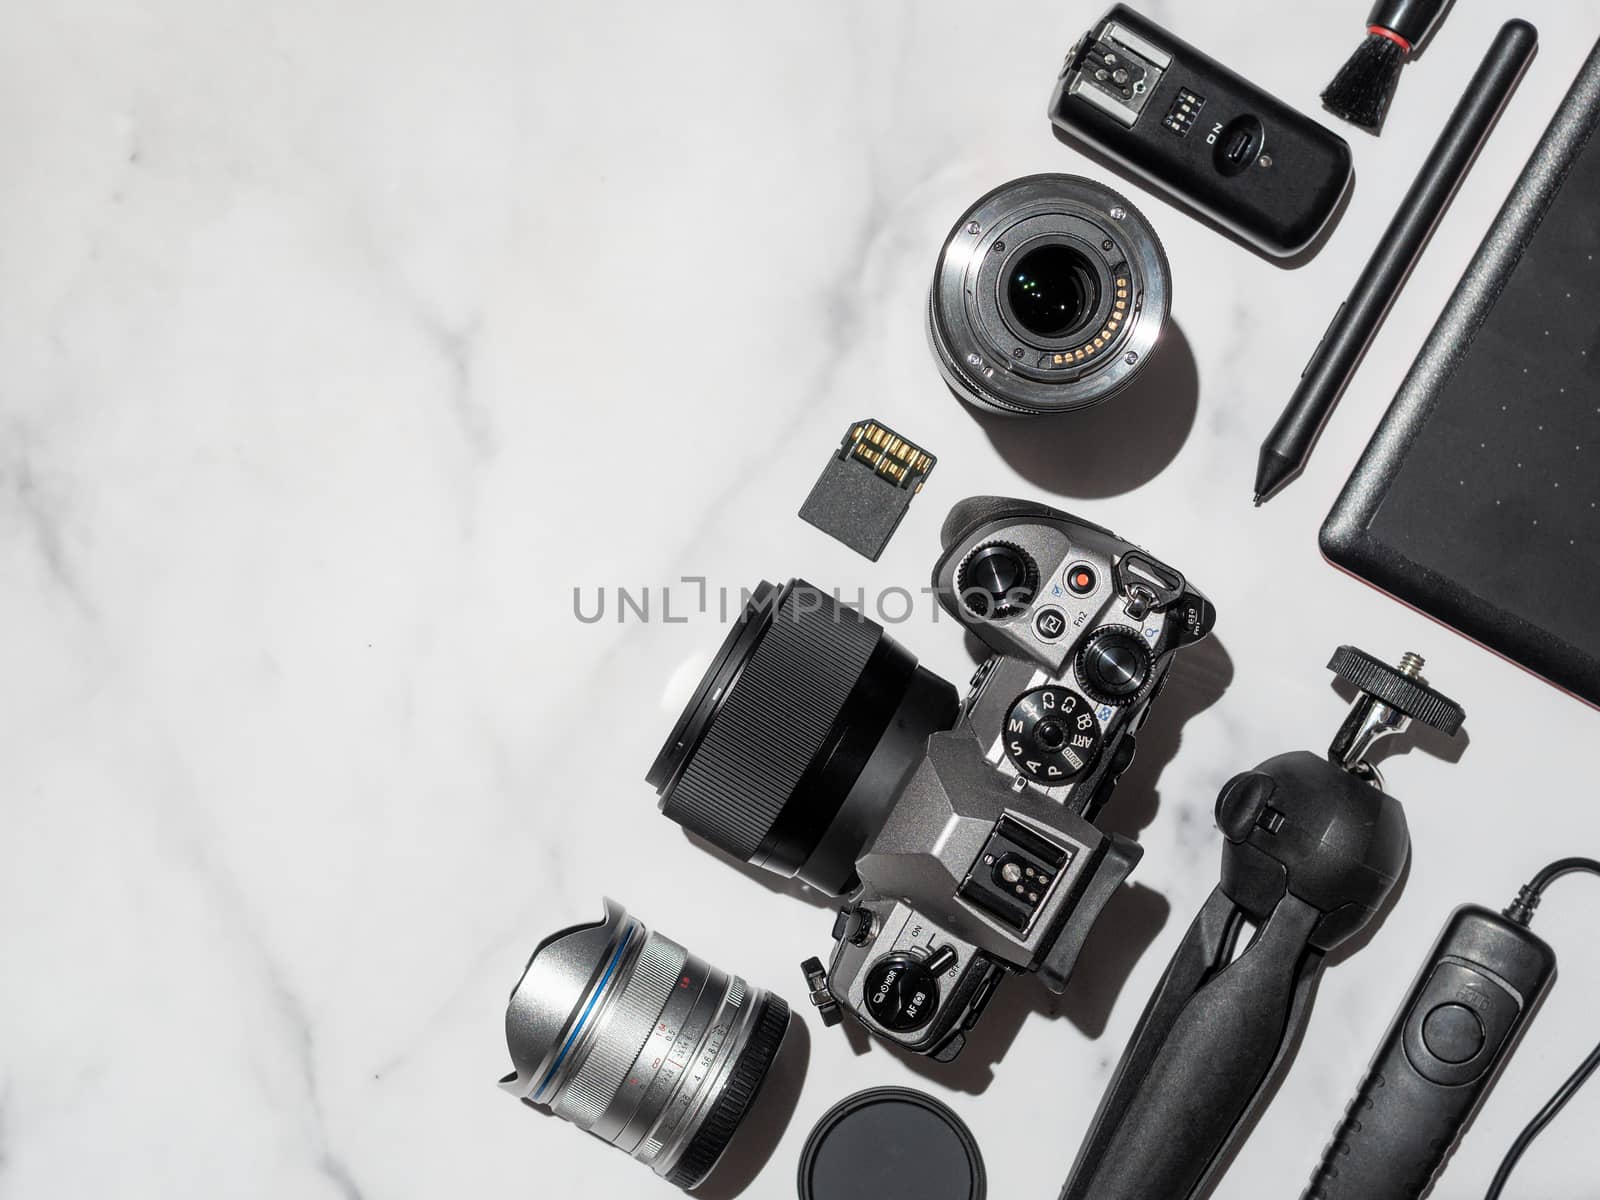 Photographer workplace with dslr camera, lens, pen tablet and camera accessories on white marble background. Camera, photography, visual content concept. Flat lay or top view. Copy space. Hard light.